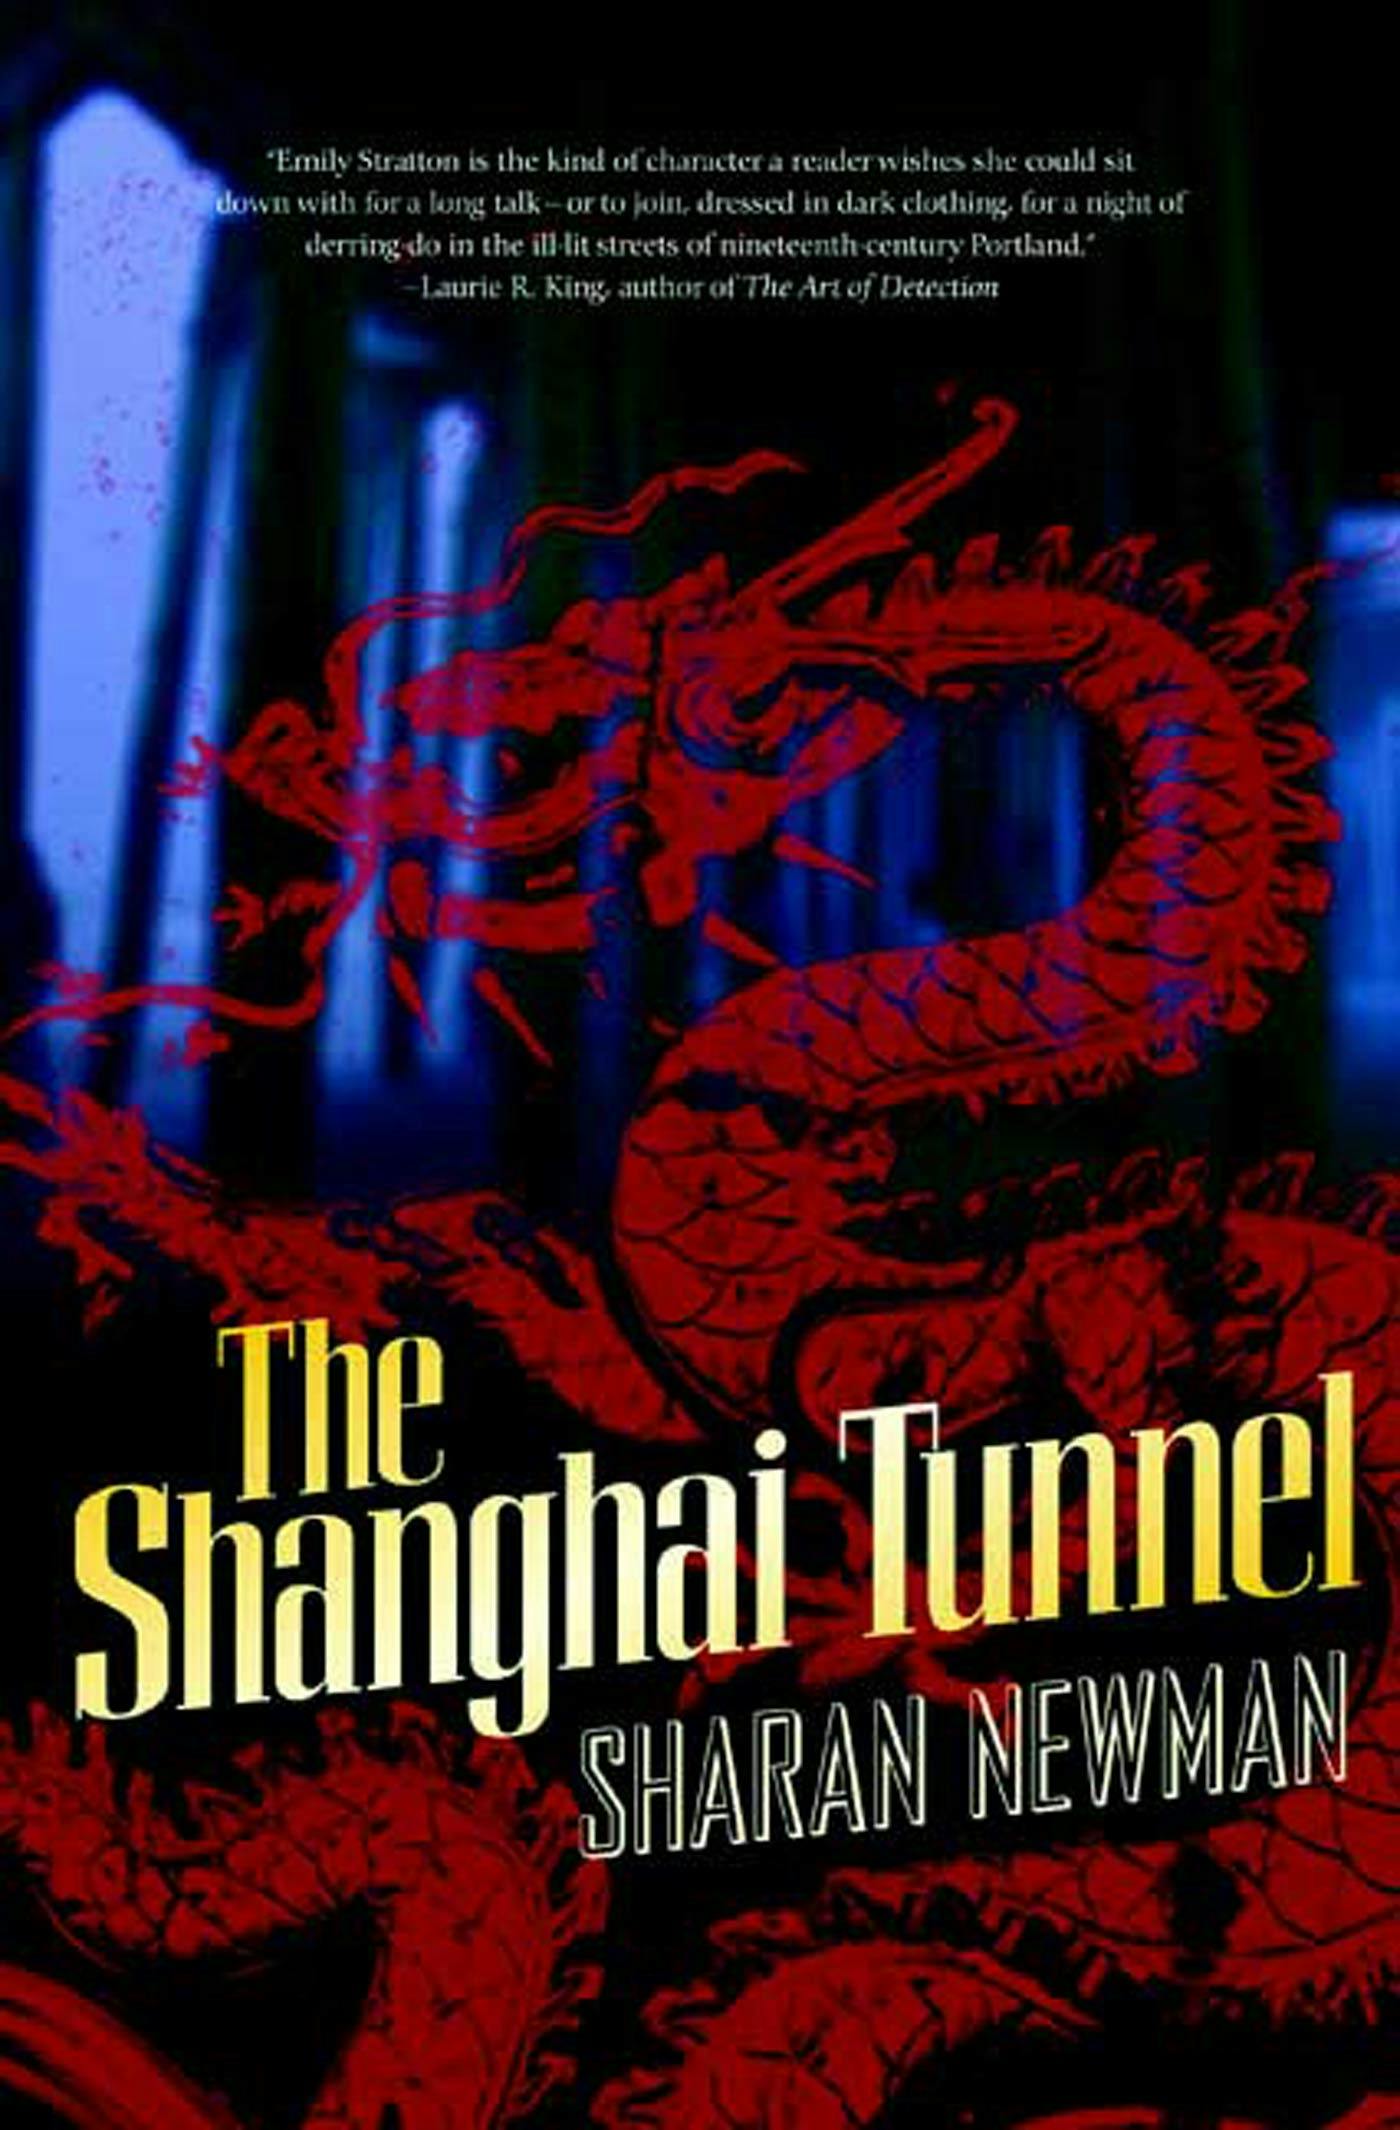 Cover for the book titled as: The Shanghai Tunnel